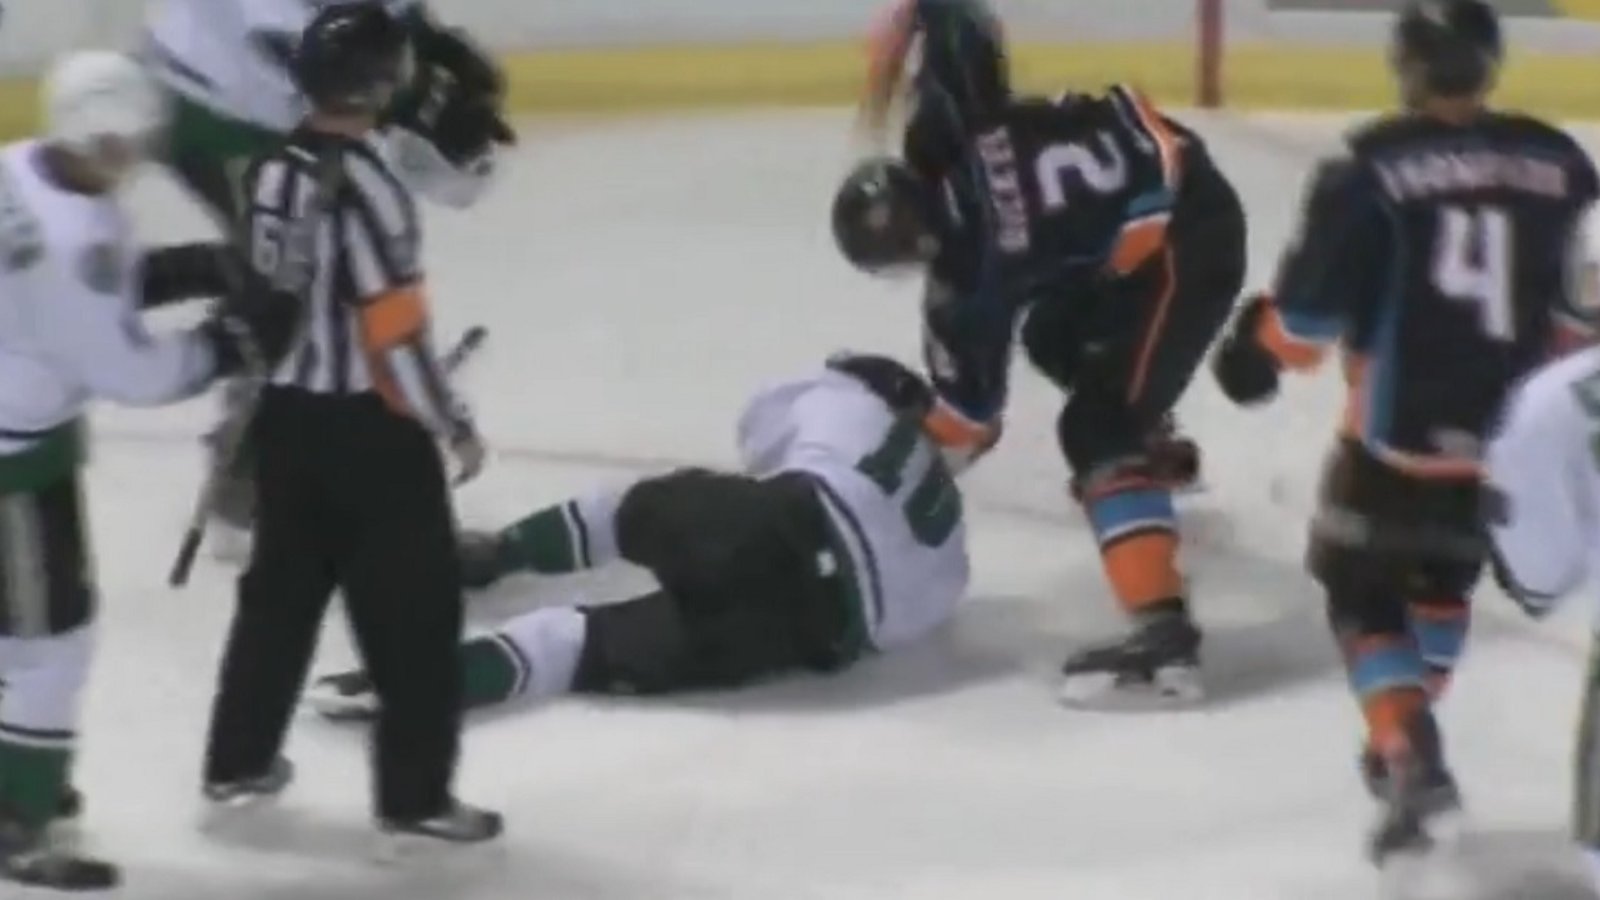 Player viciously attacked during a brawl on Friday night. 